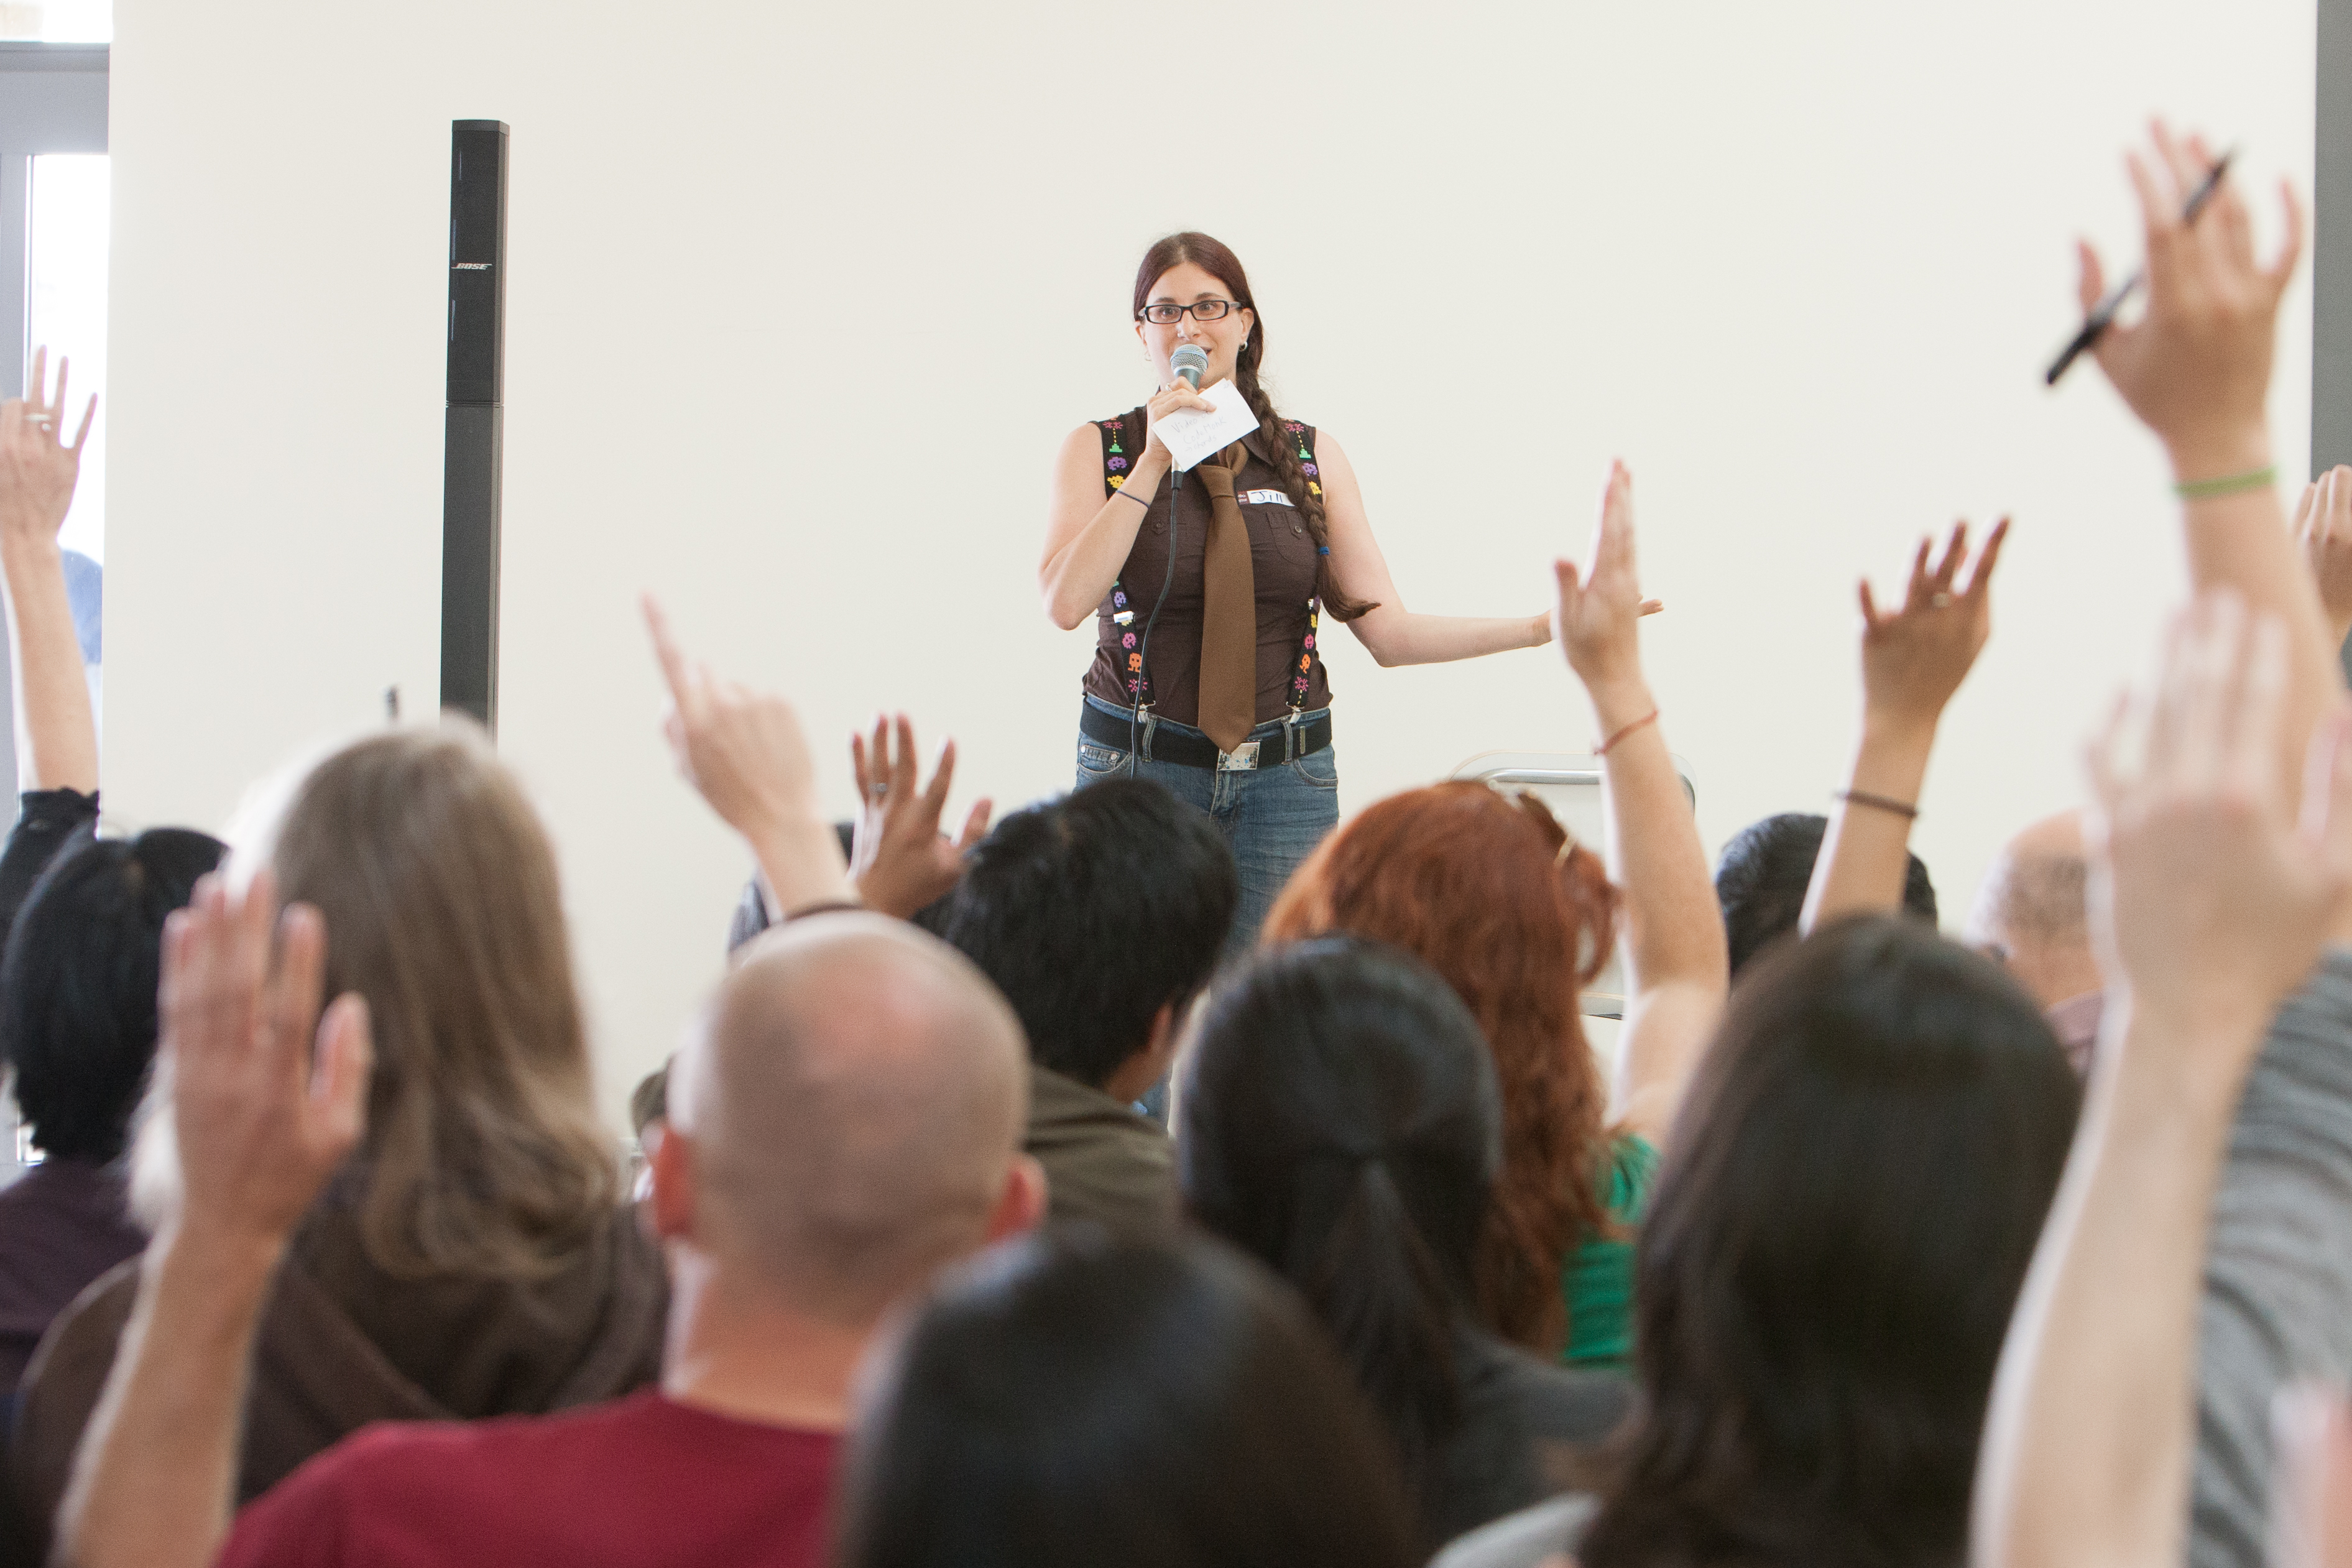 A woman holding a microphone, in front of a lot of people with raised hands.